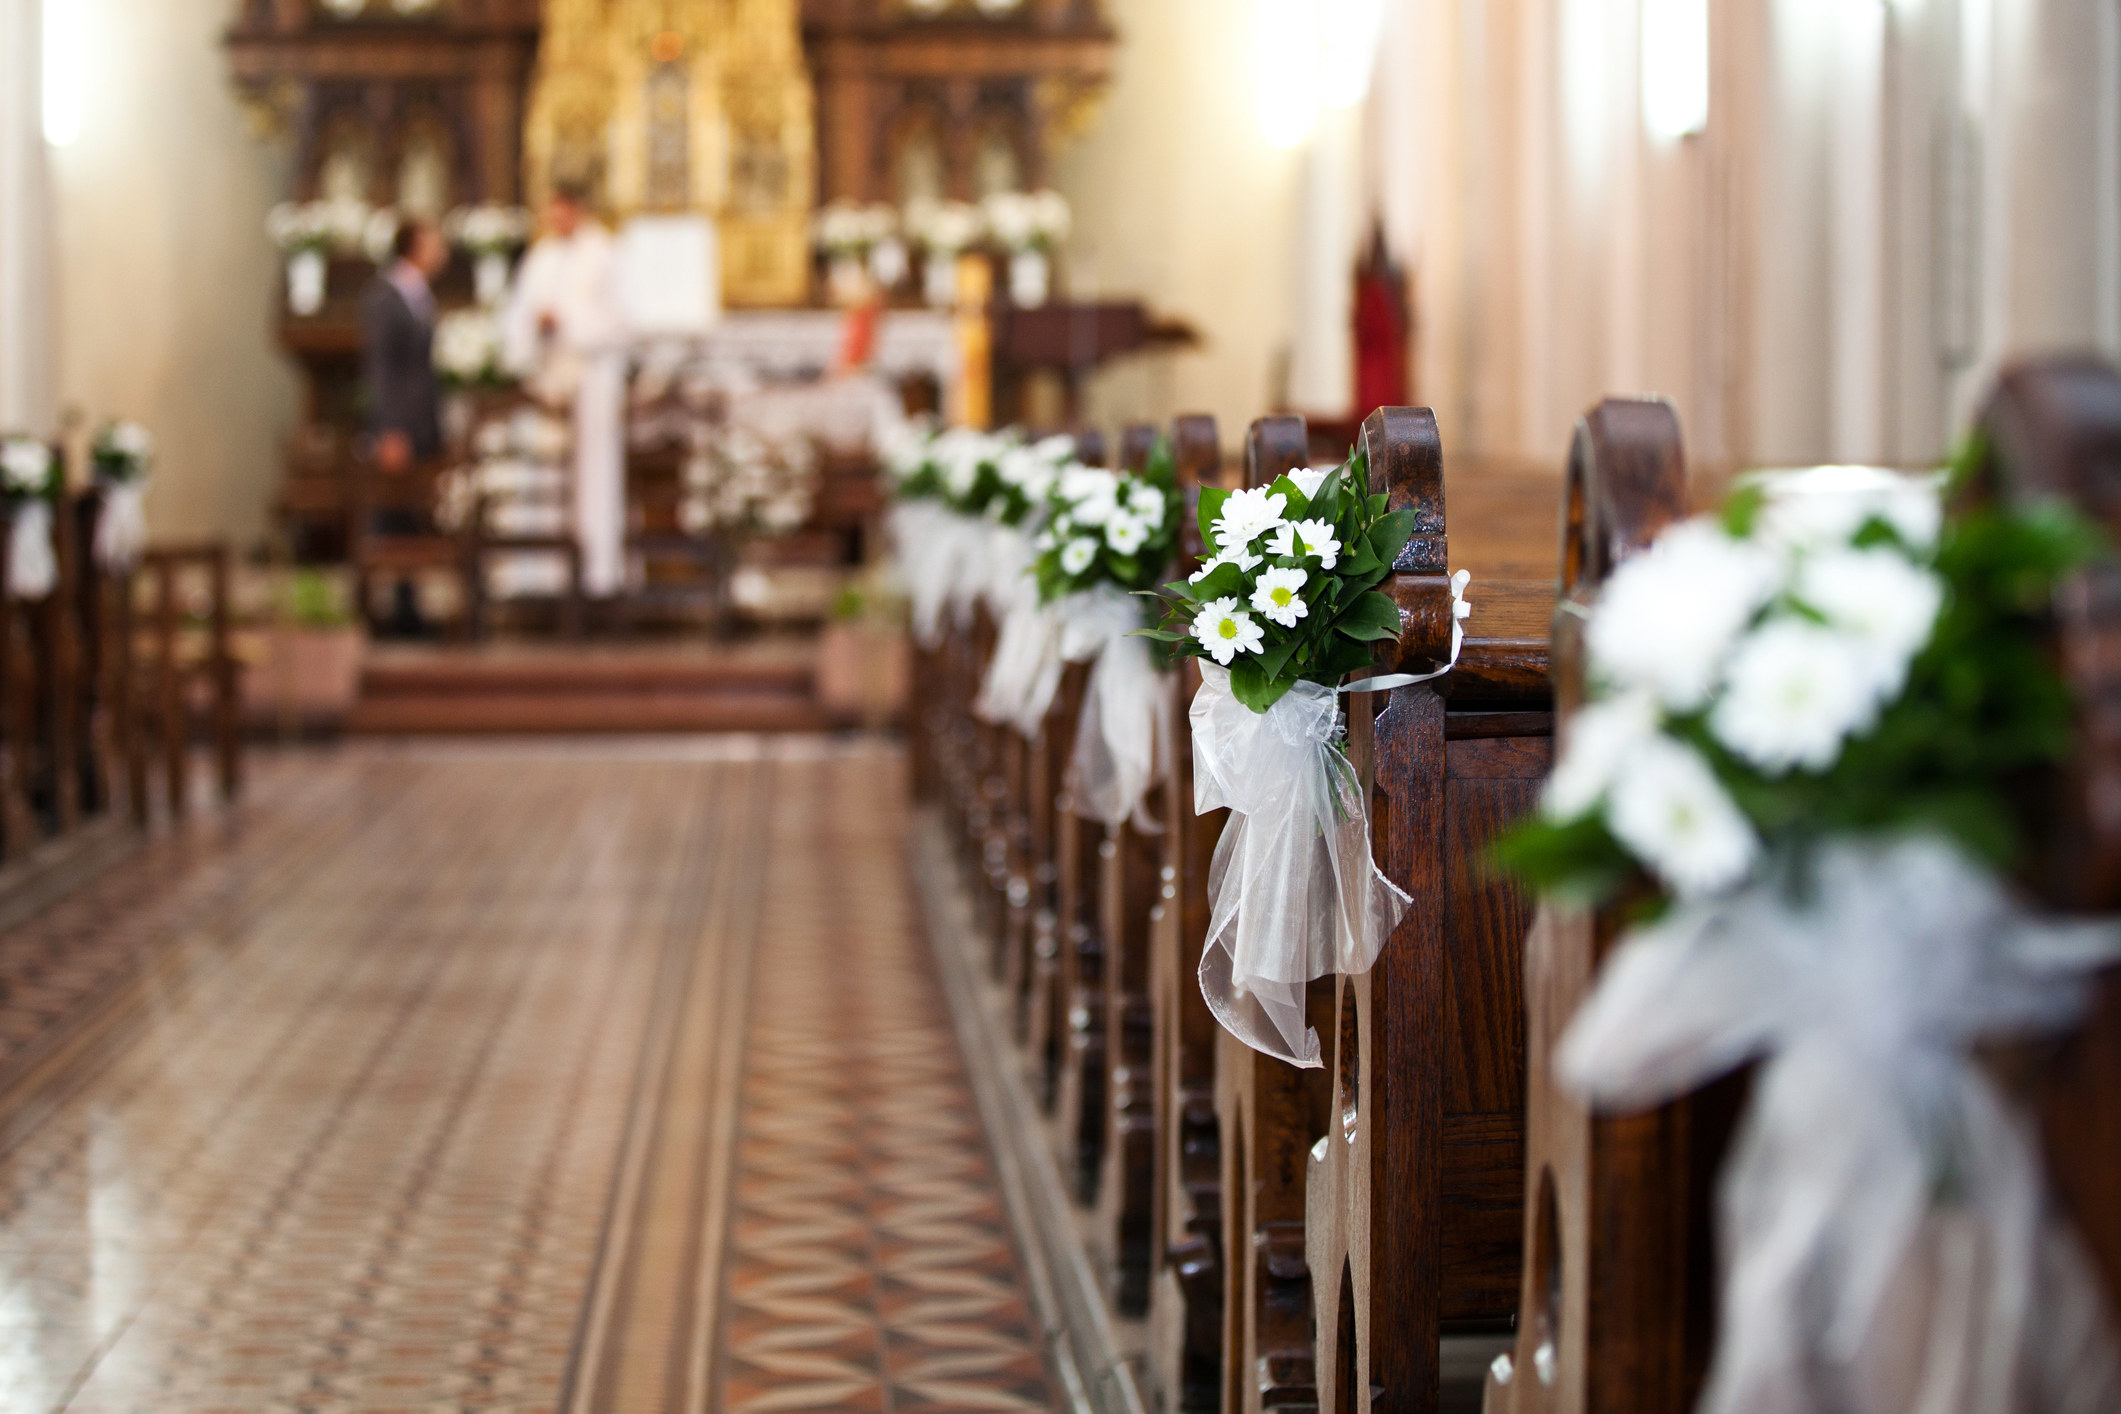 Church pews decorated for a wedding